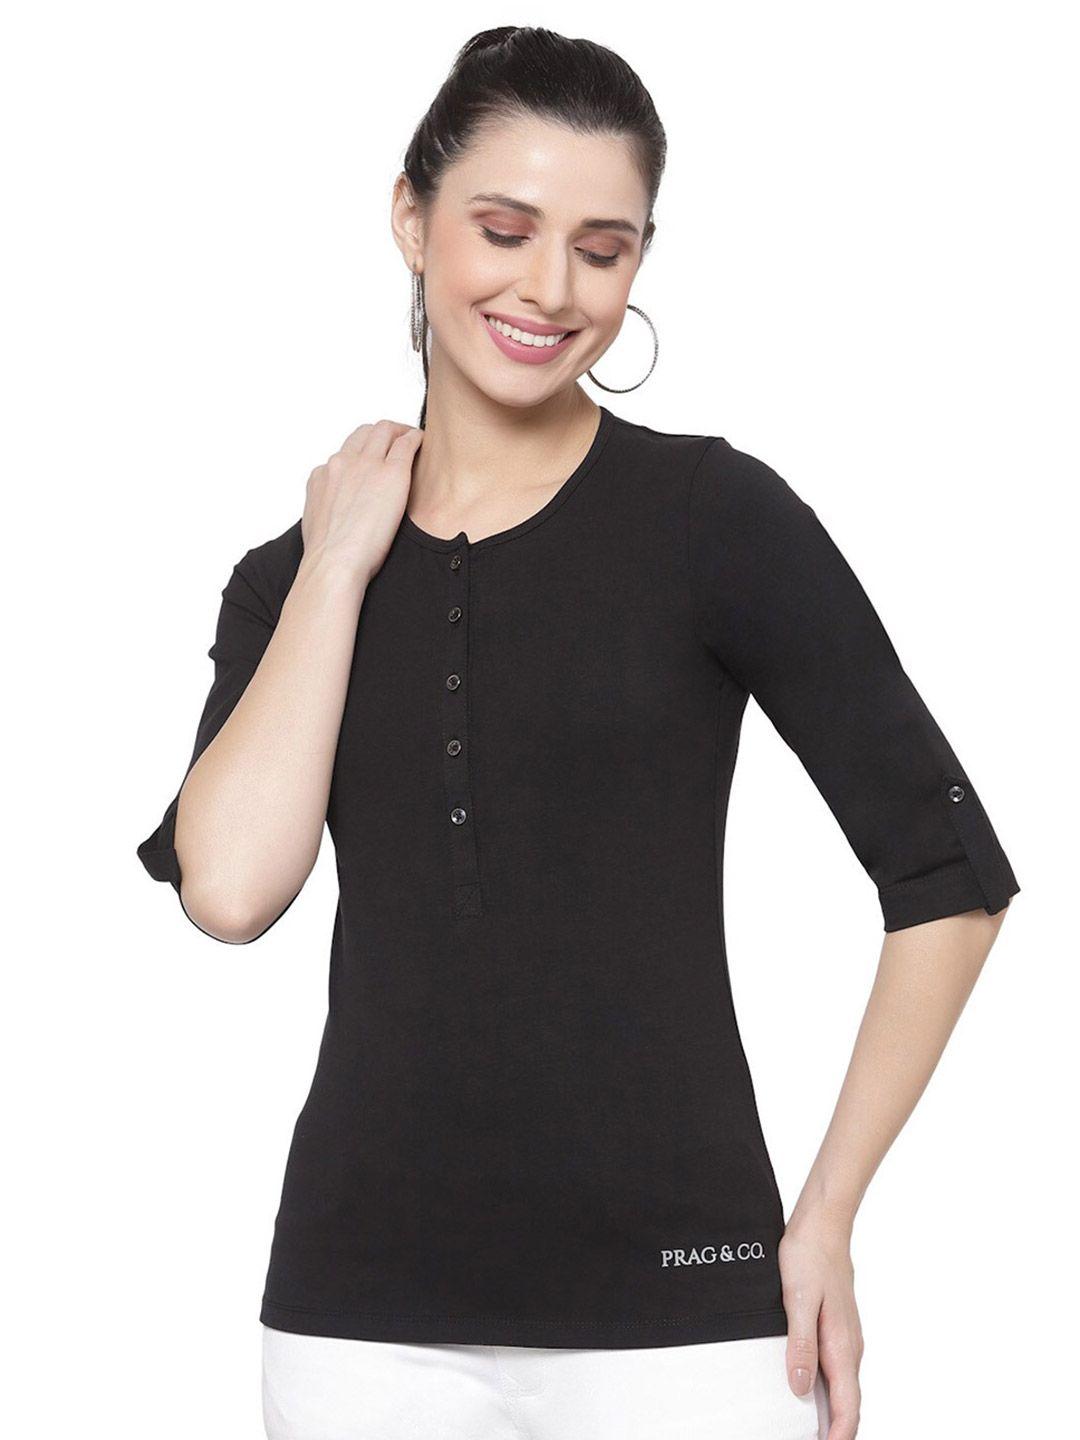 prag & co women black henley neck roll-up sleeves antimicrobial t-shirt